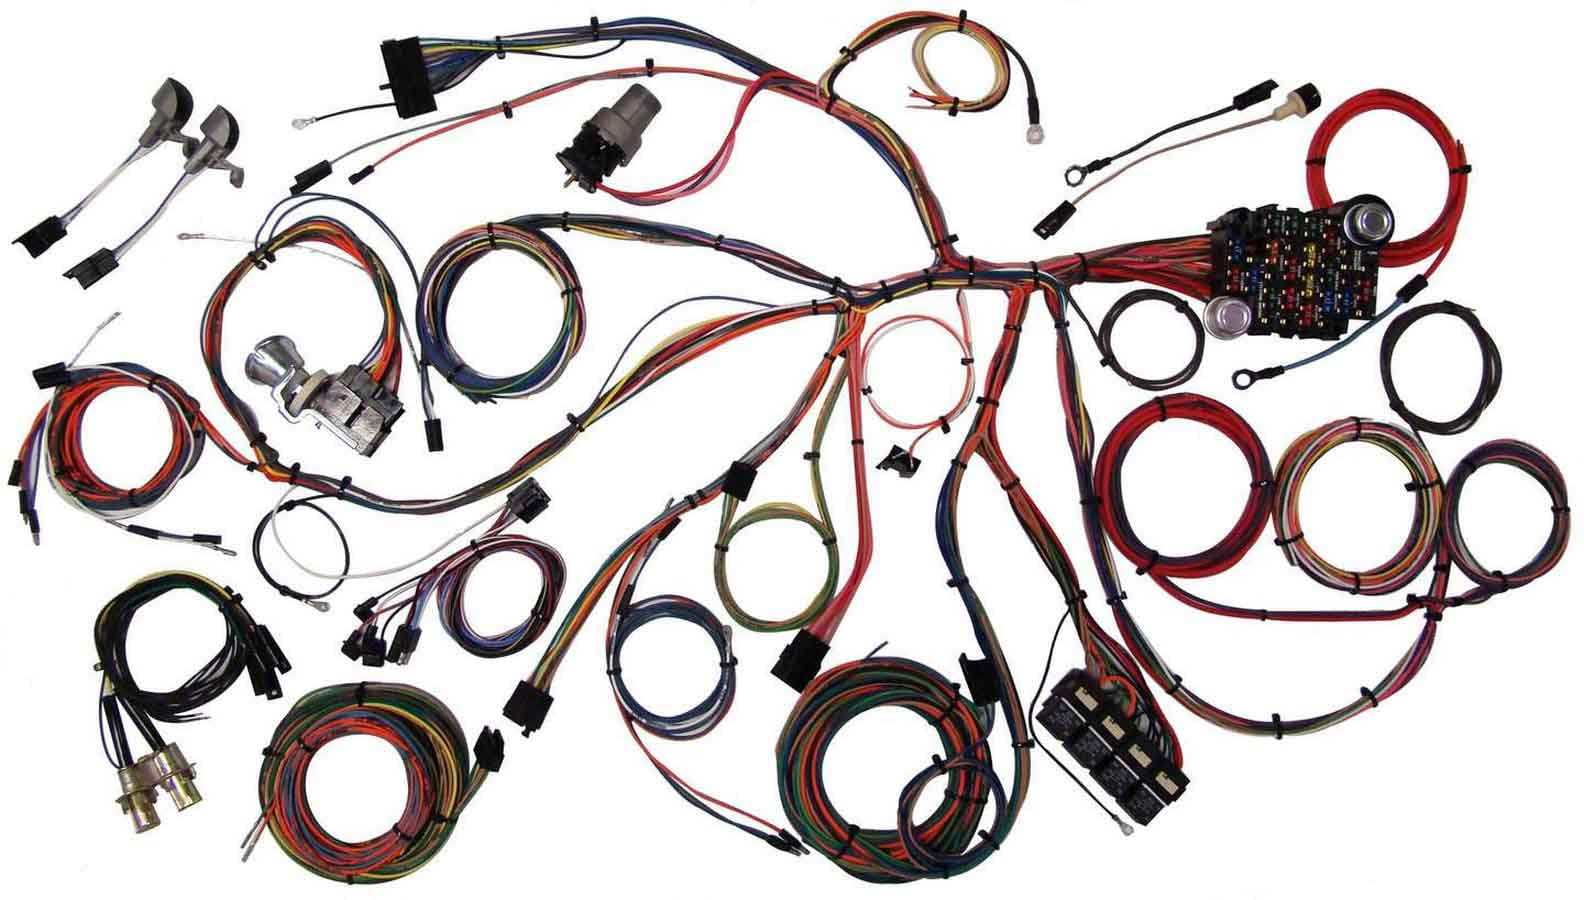 1968 Mustang Wiring Harness Diagram from i5.walmartimages.com